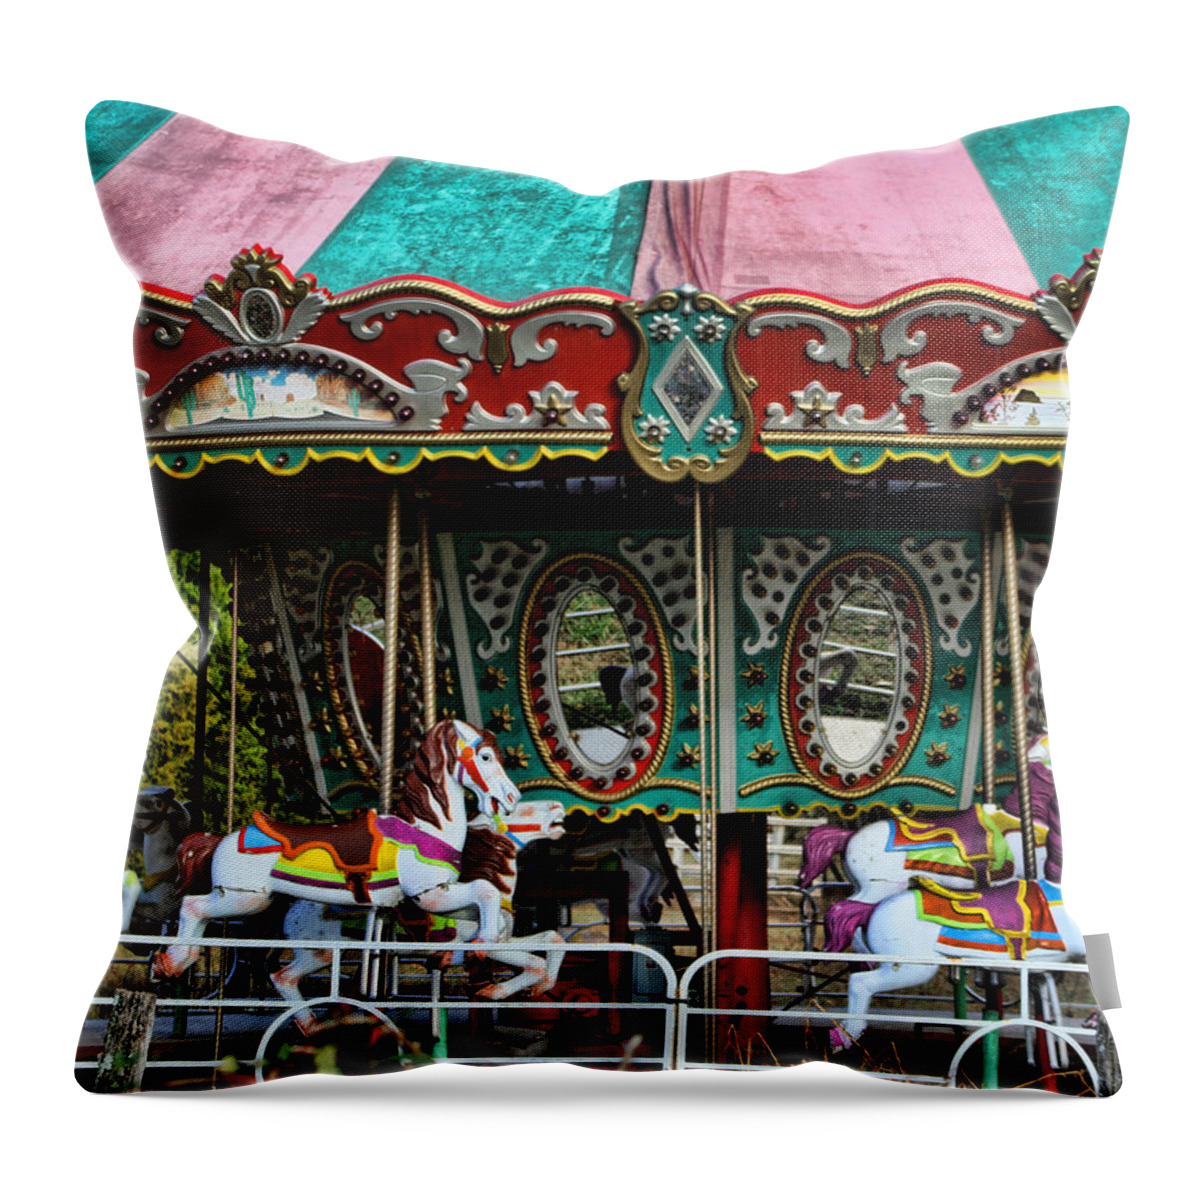 Merry-go-round Throw Pillow featuring the photograph Vintage Circus Carousel - Merry-Go-Round by Kathy Clark